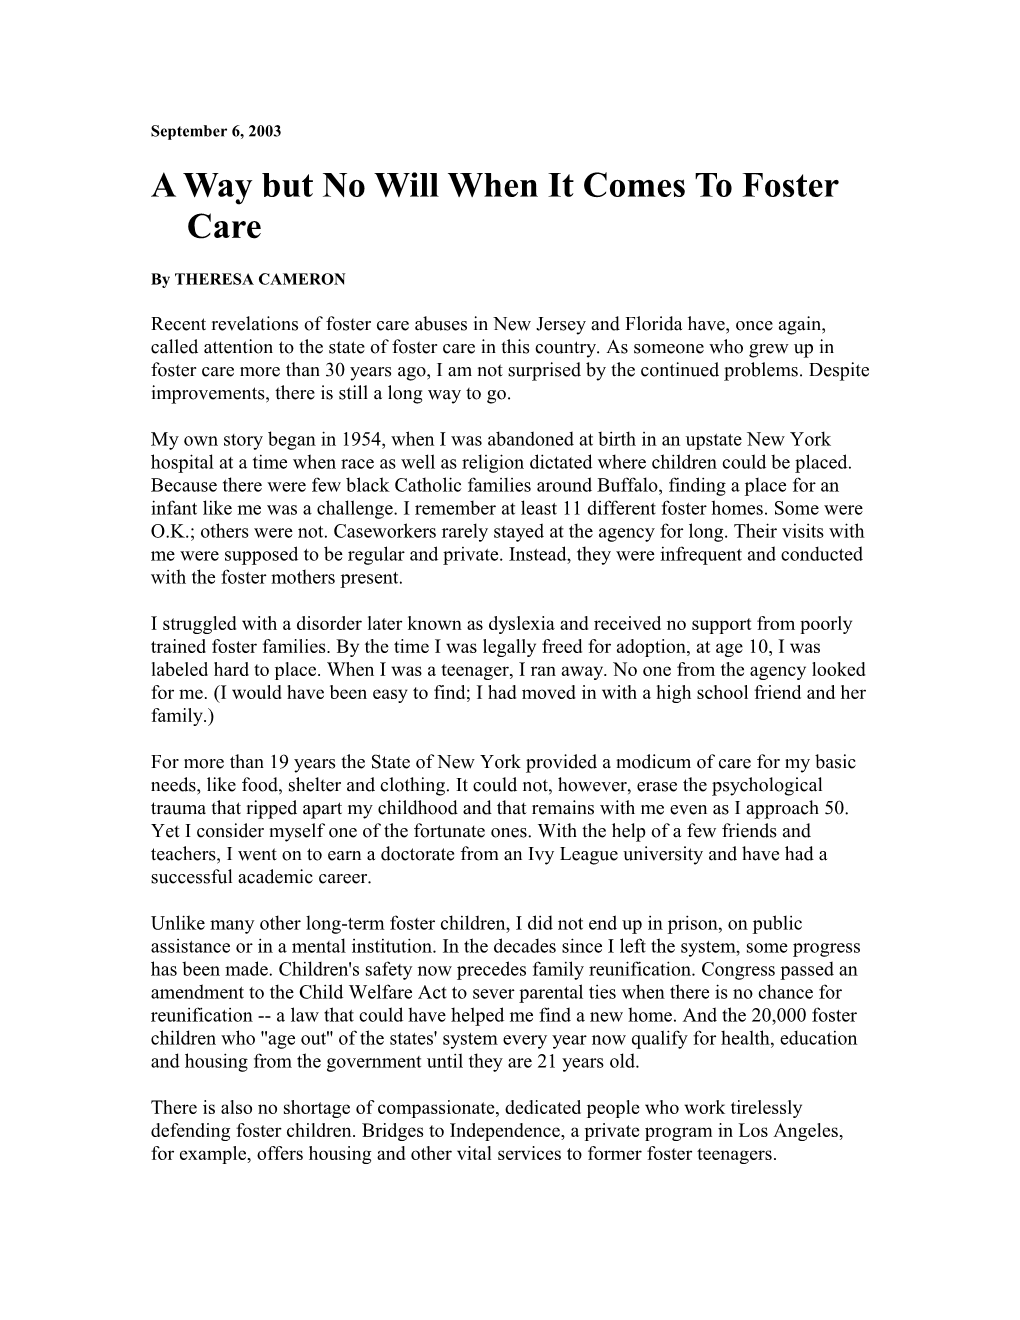 A Way but No Will When It Comes to Foster Care